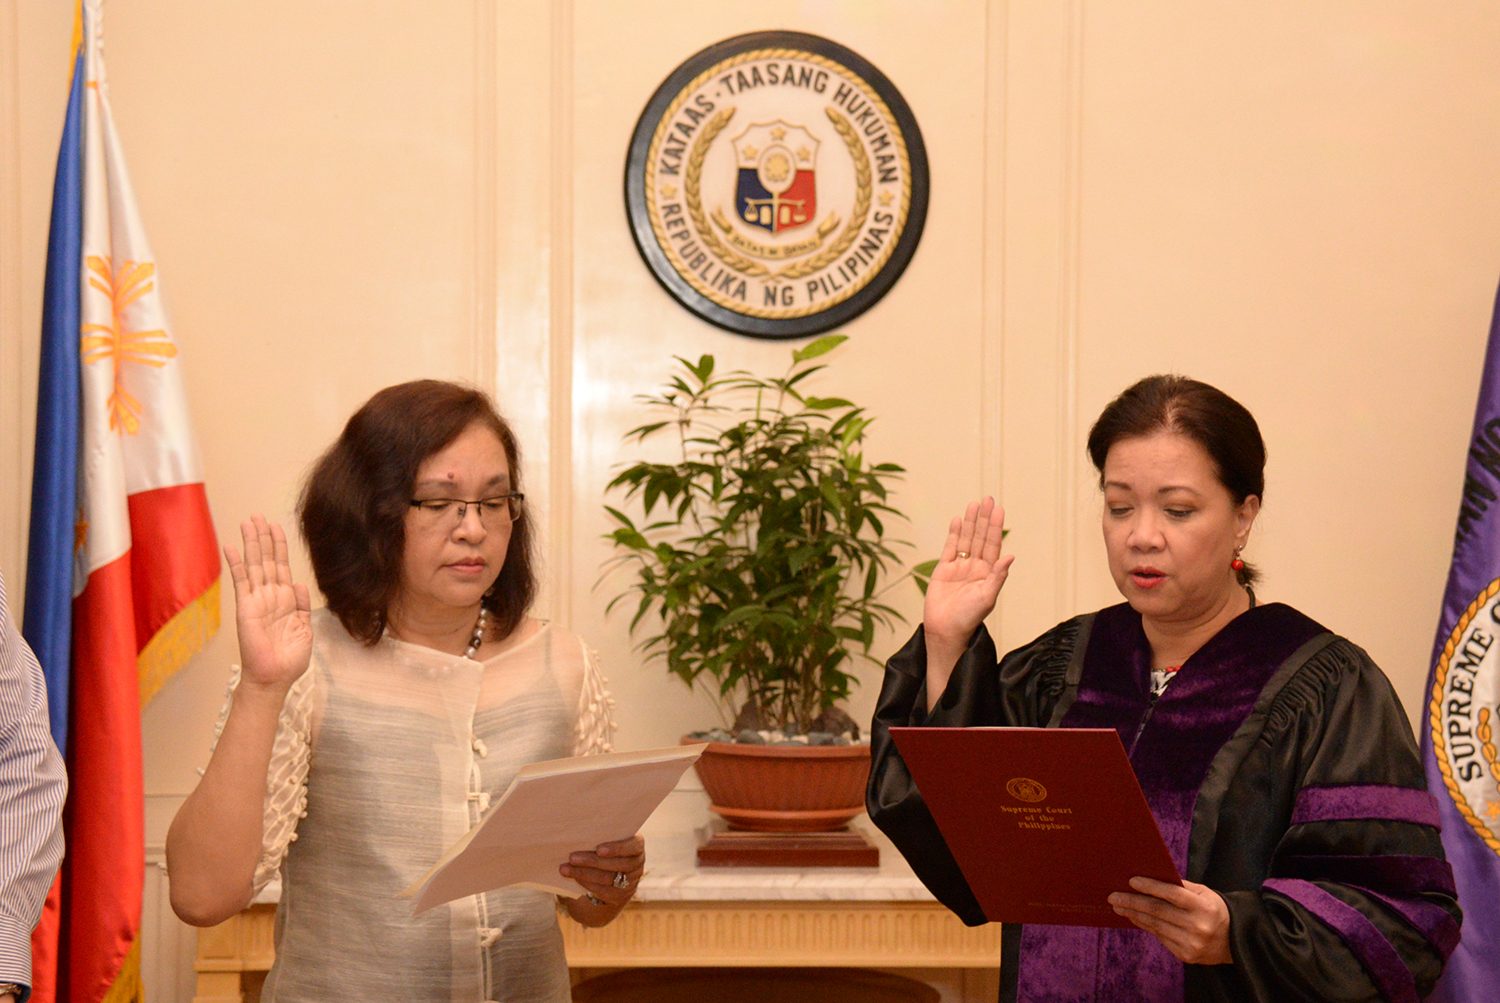 Sandiganbayan Associate Justice Geraldine Faith Econg takes her oath before Supreme Court Chief Justice Maria Lourdes Sereno.  